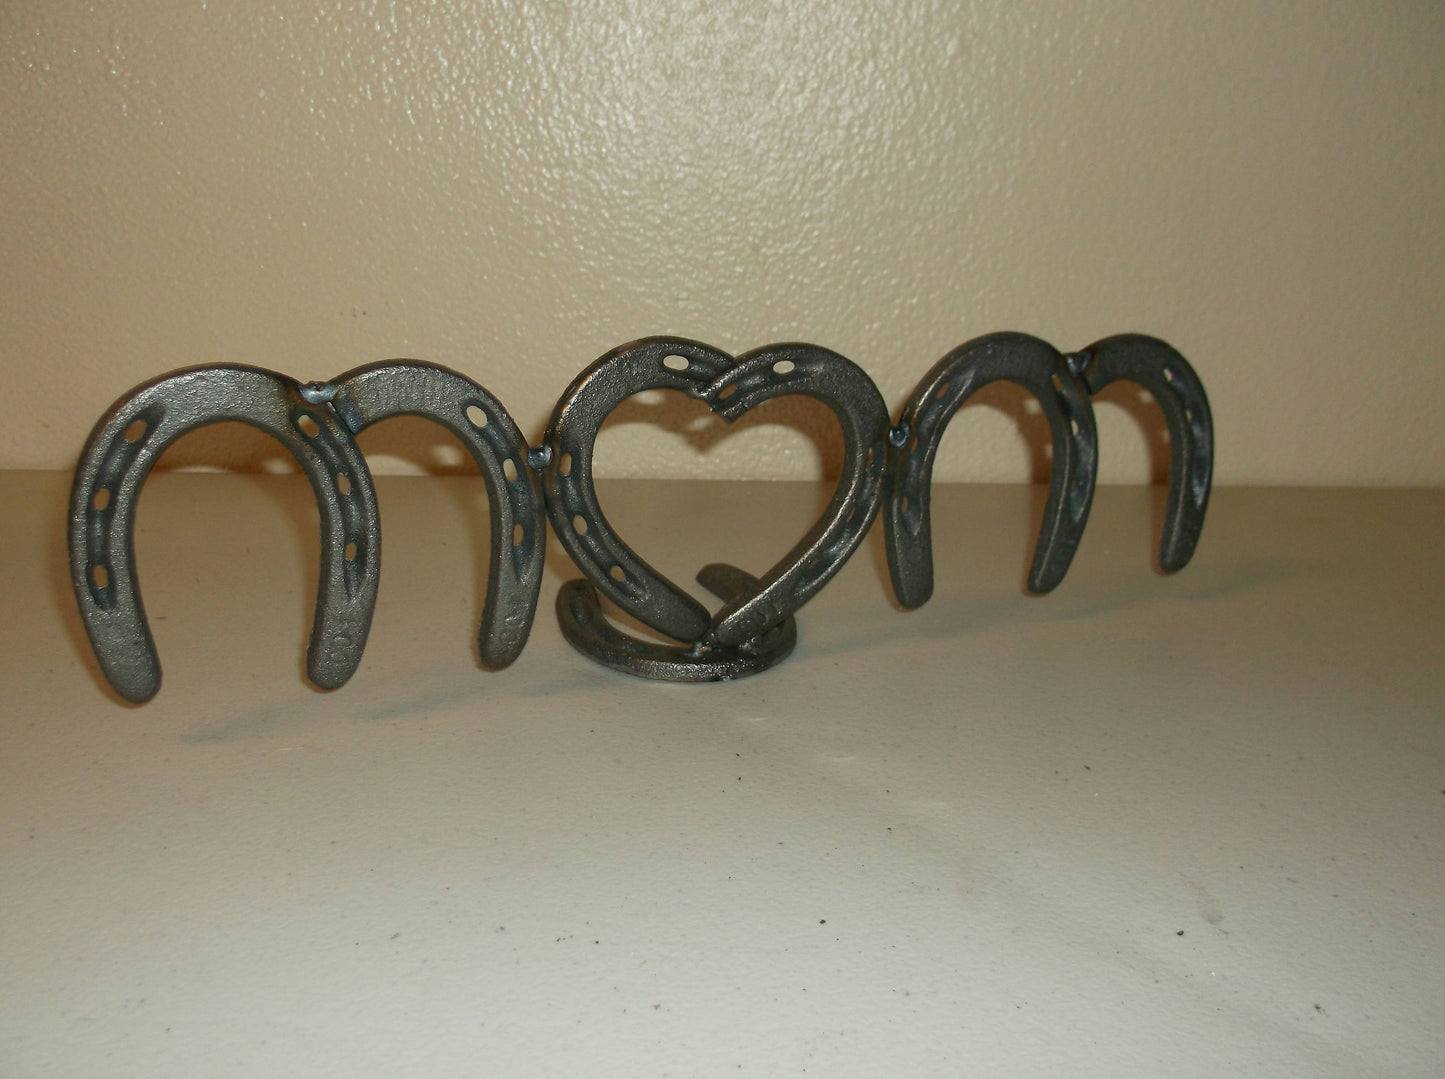 Horseshoes, Mother's Day Gift, Present for Mom